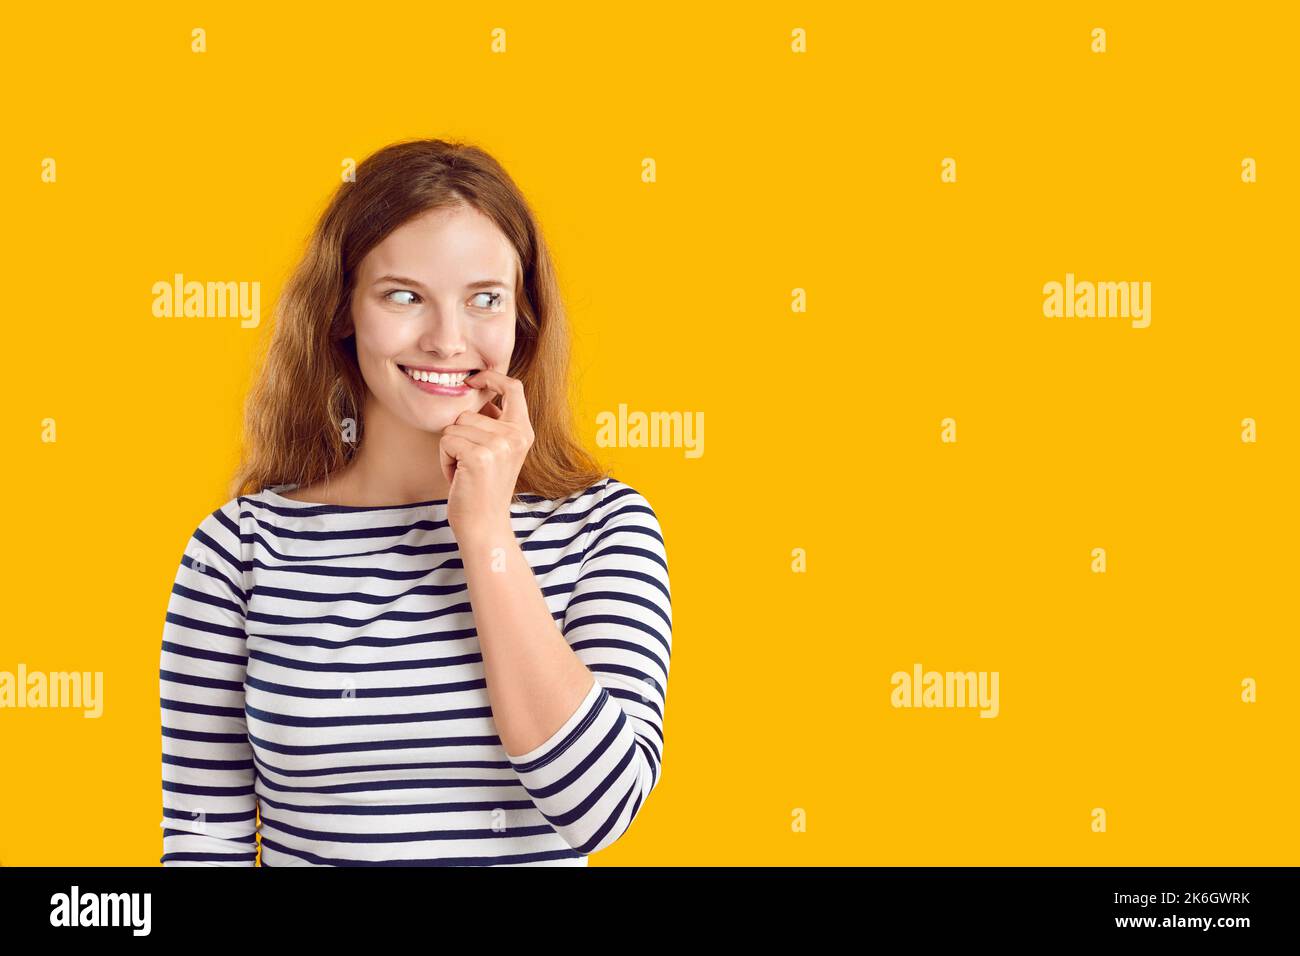 Woman with funny awkward smile on face looks sideways on yellow copy space background Stock Photo